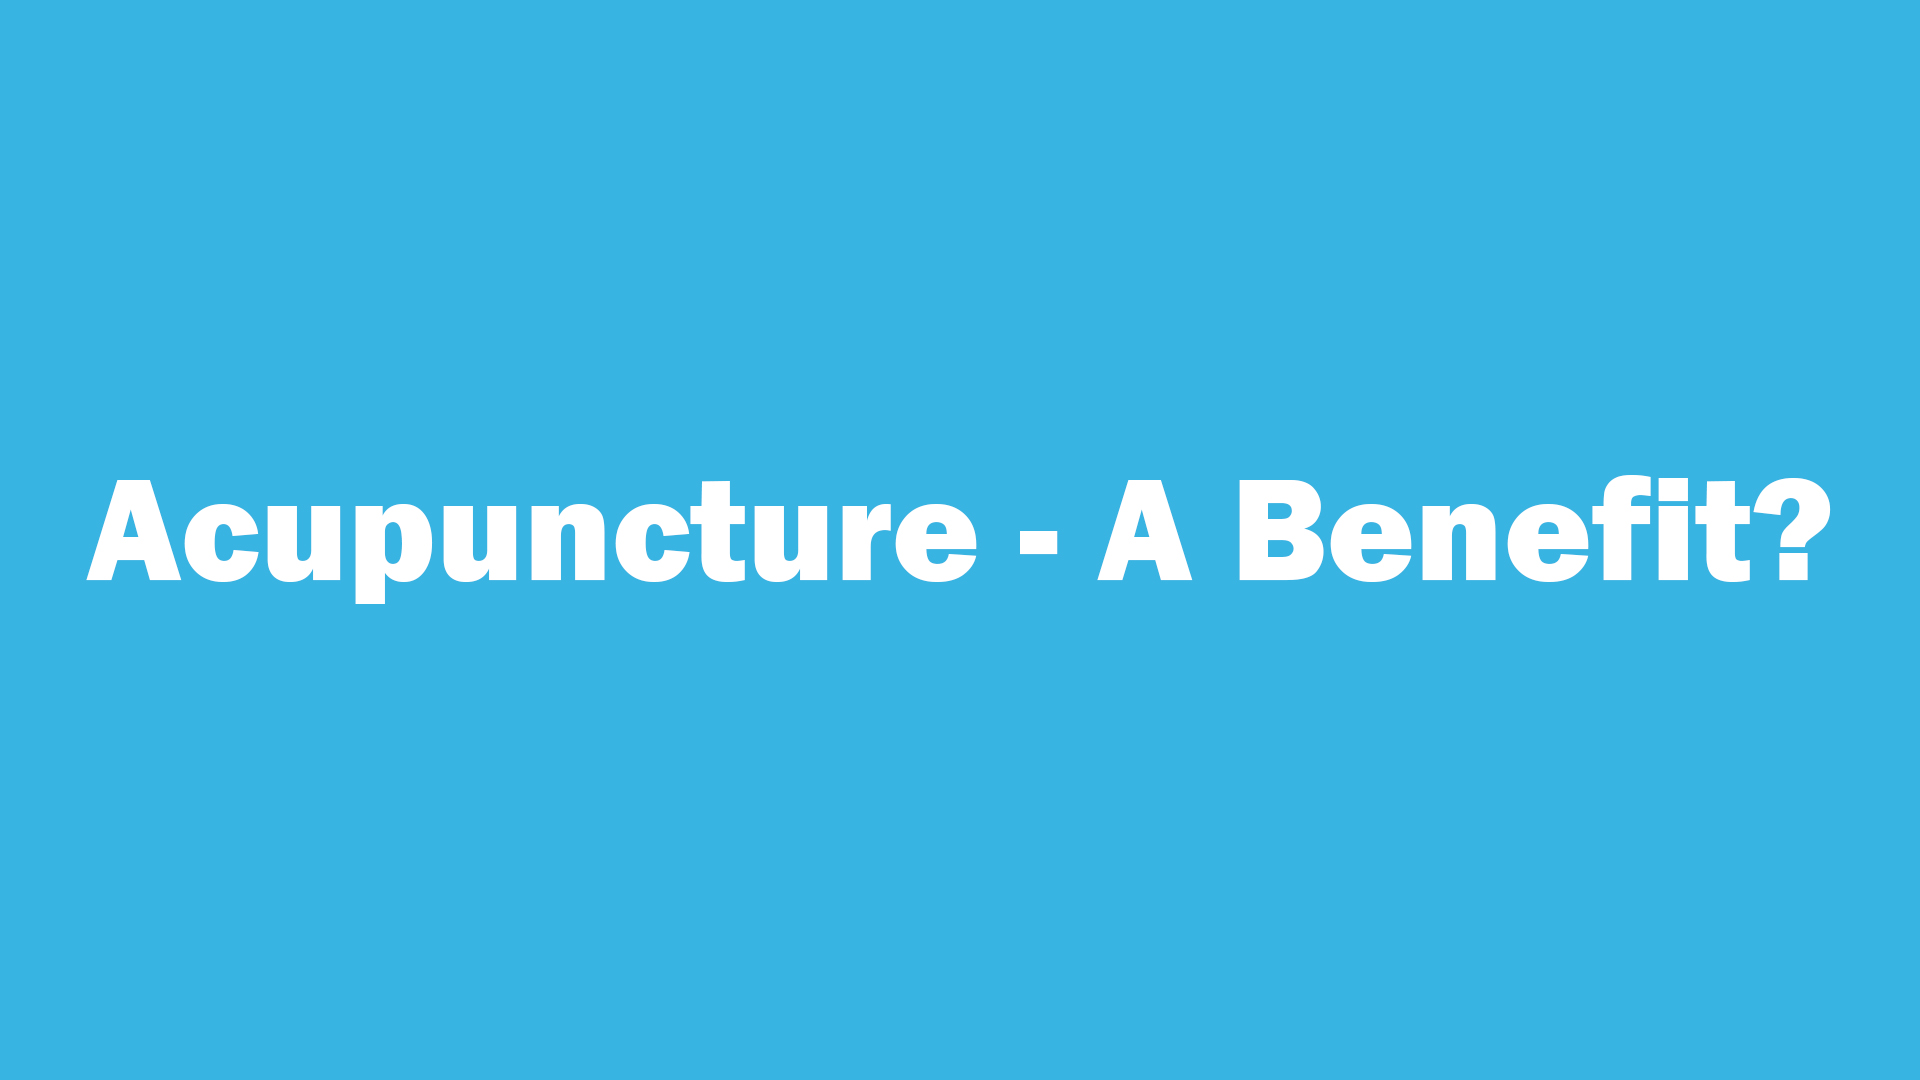 Acupuncture - A Benefit?